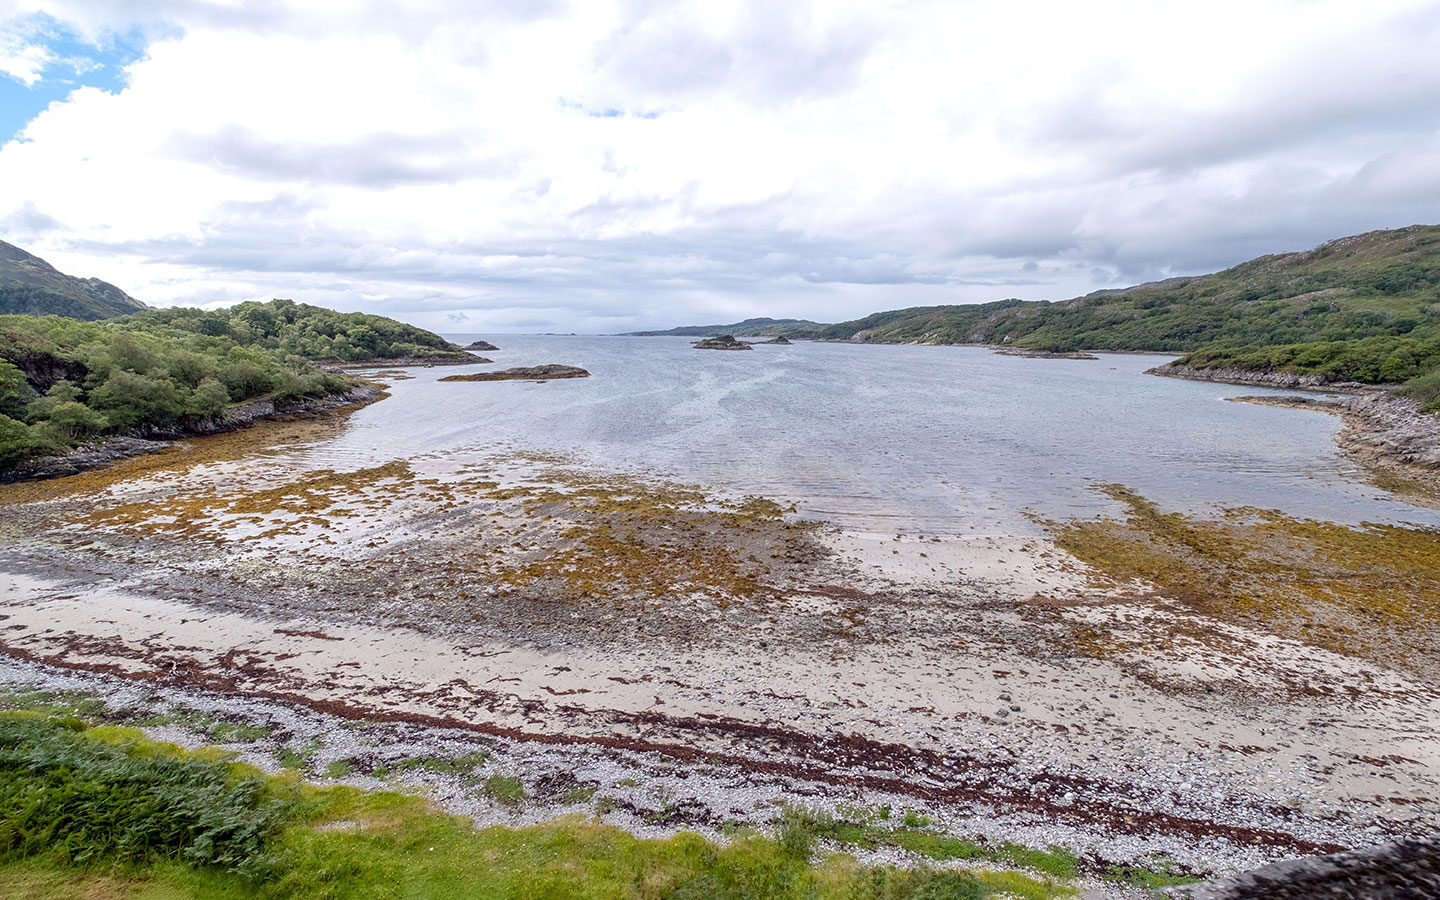 Beaches along the route of the West Highland Line